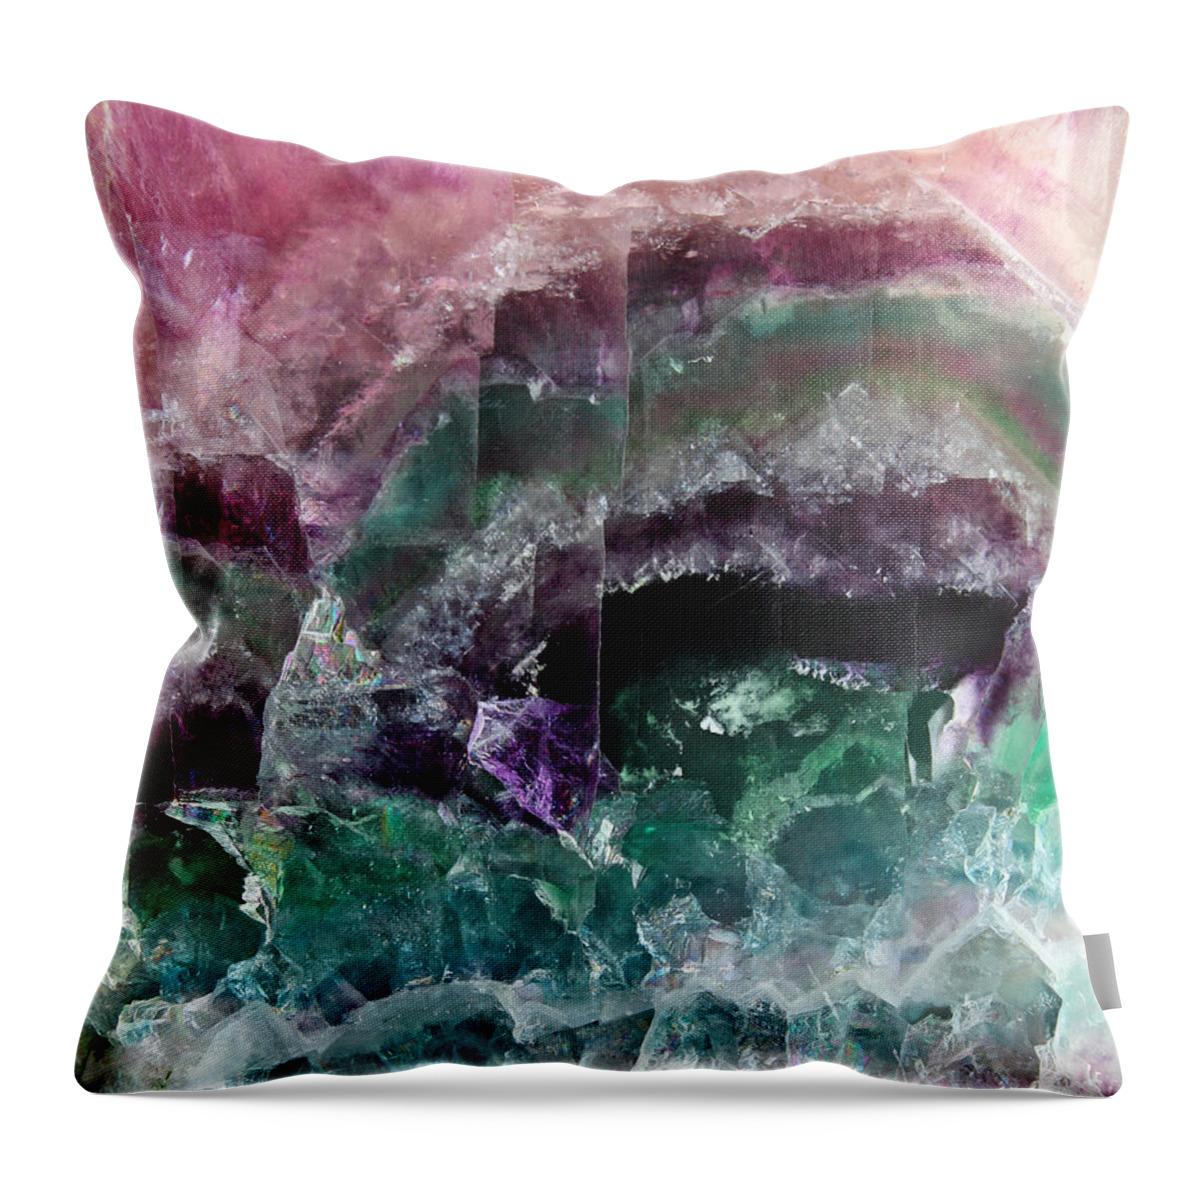 Pink & Green Watermelon Tourmaline Crystal Rock Slab Throw Pillow featuring the photograph Watermelon Crystal by The Quarry